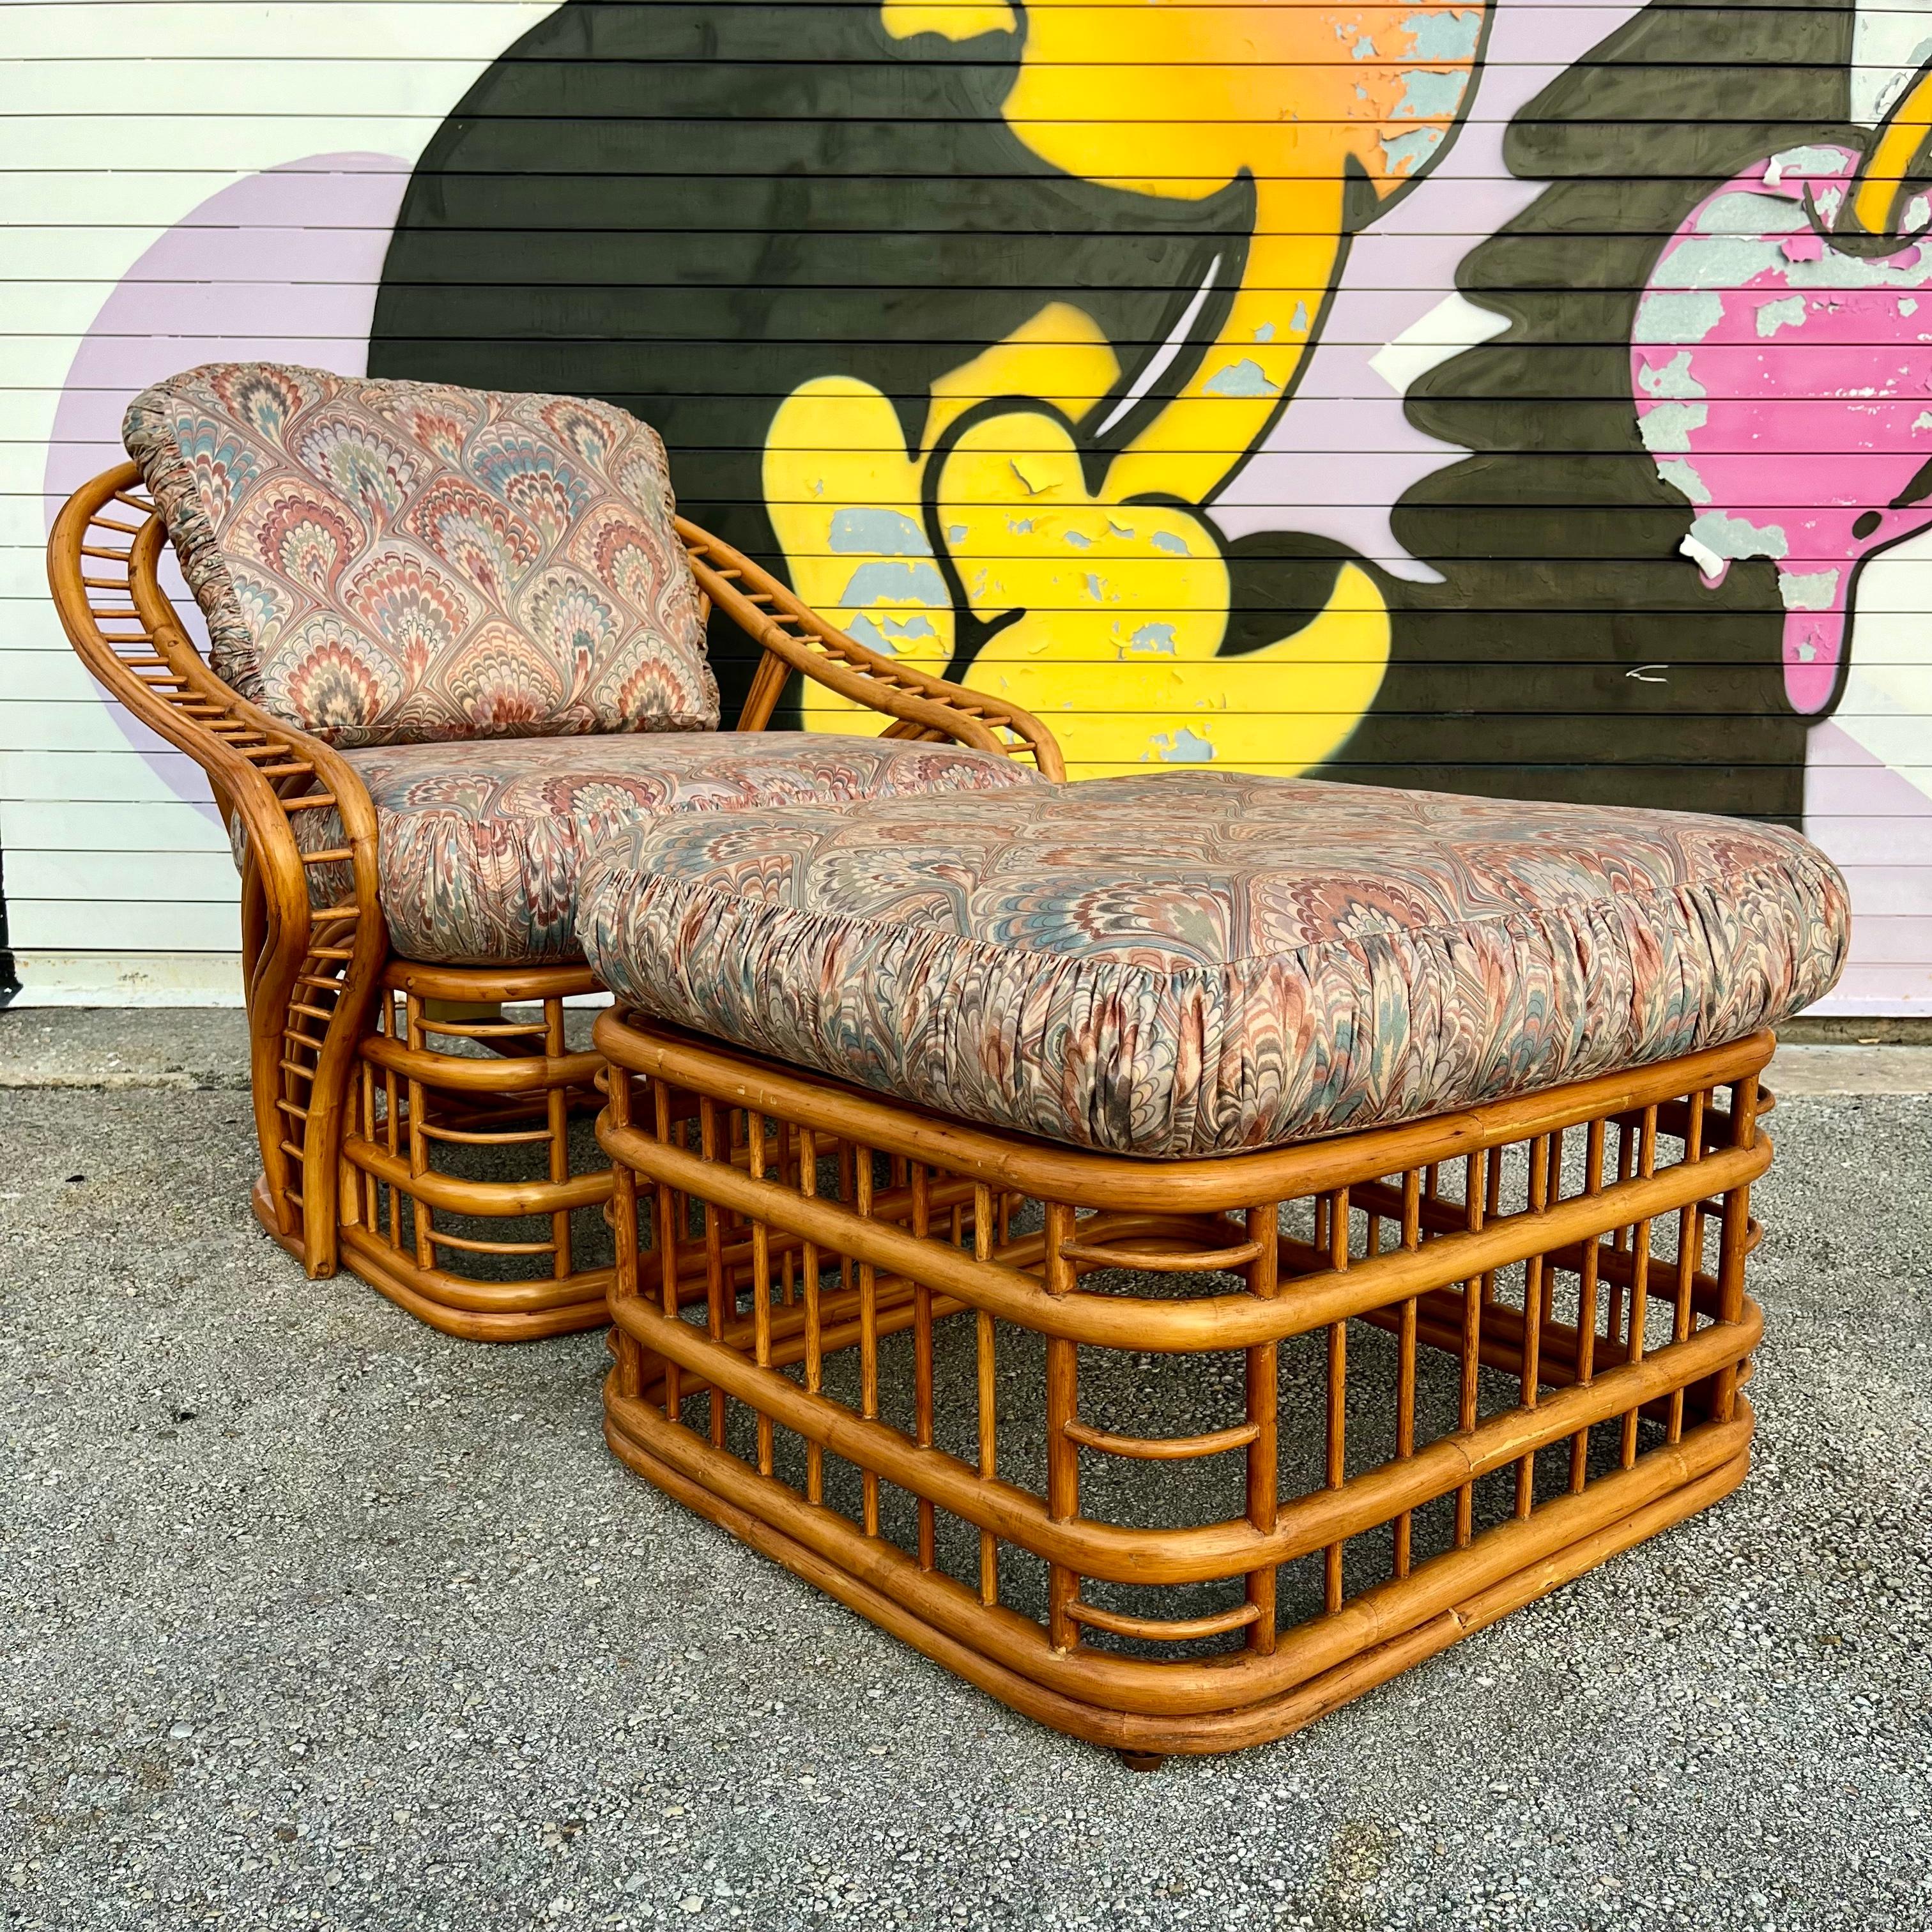 Vintage Coastal Style Rattan Lounge Chair and Ottoman Set by Whitecraft Rattan Inc, Miami FL. Circa 1970s
Features a bent rattan frame with an intricate and dynamic fluid design at the back and armrests. 
In excellent original condition with very